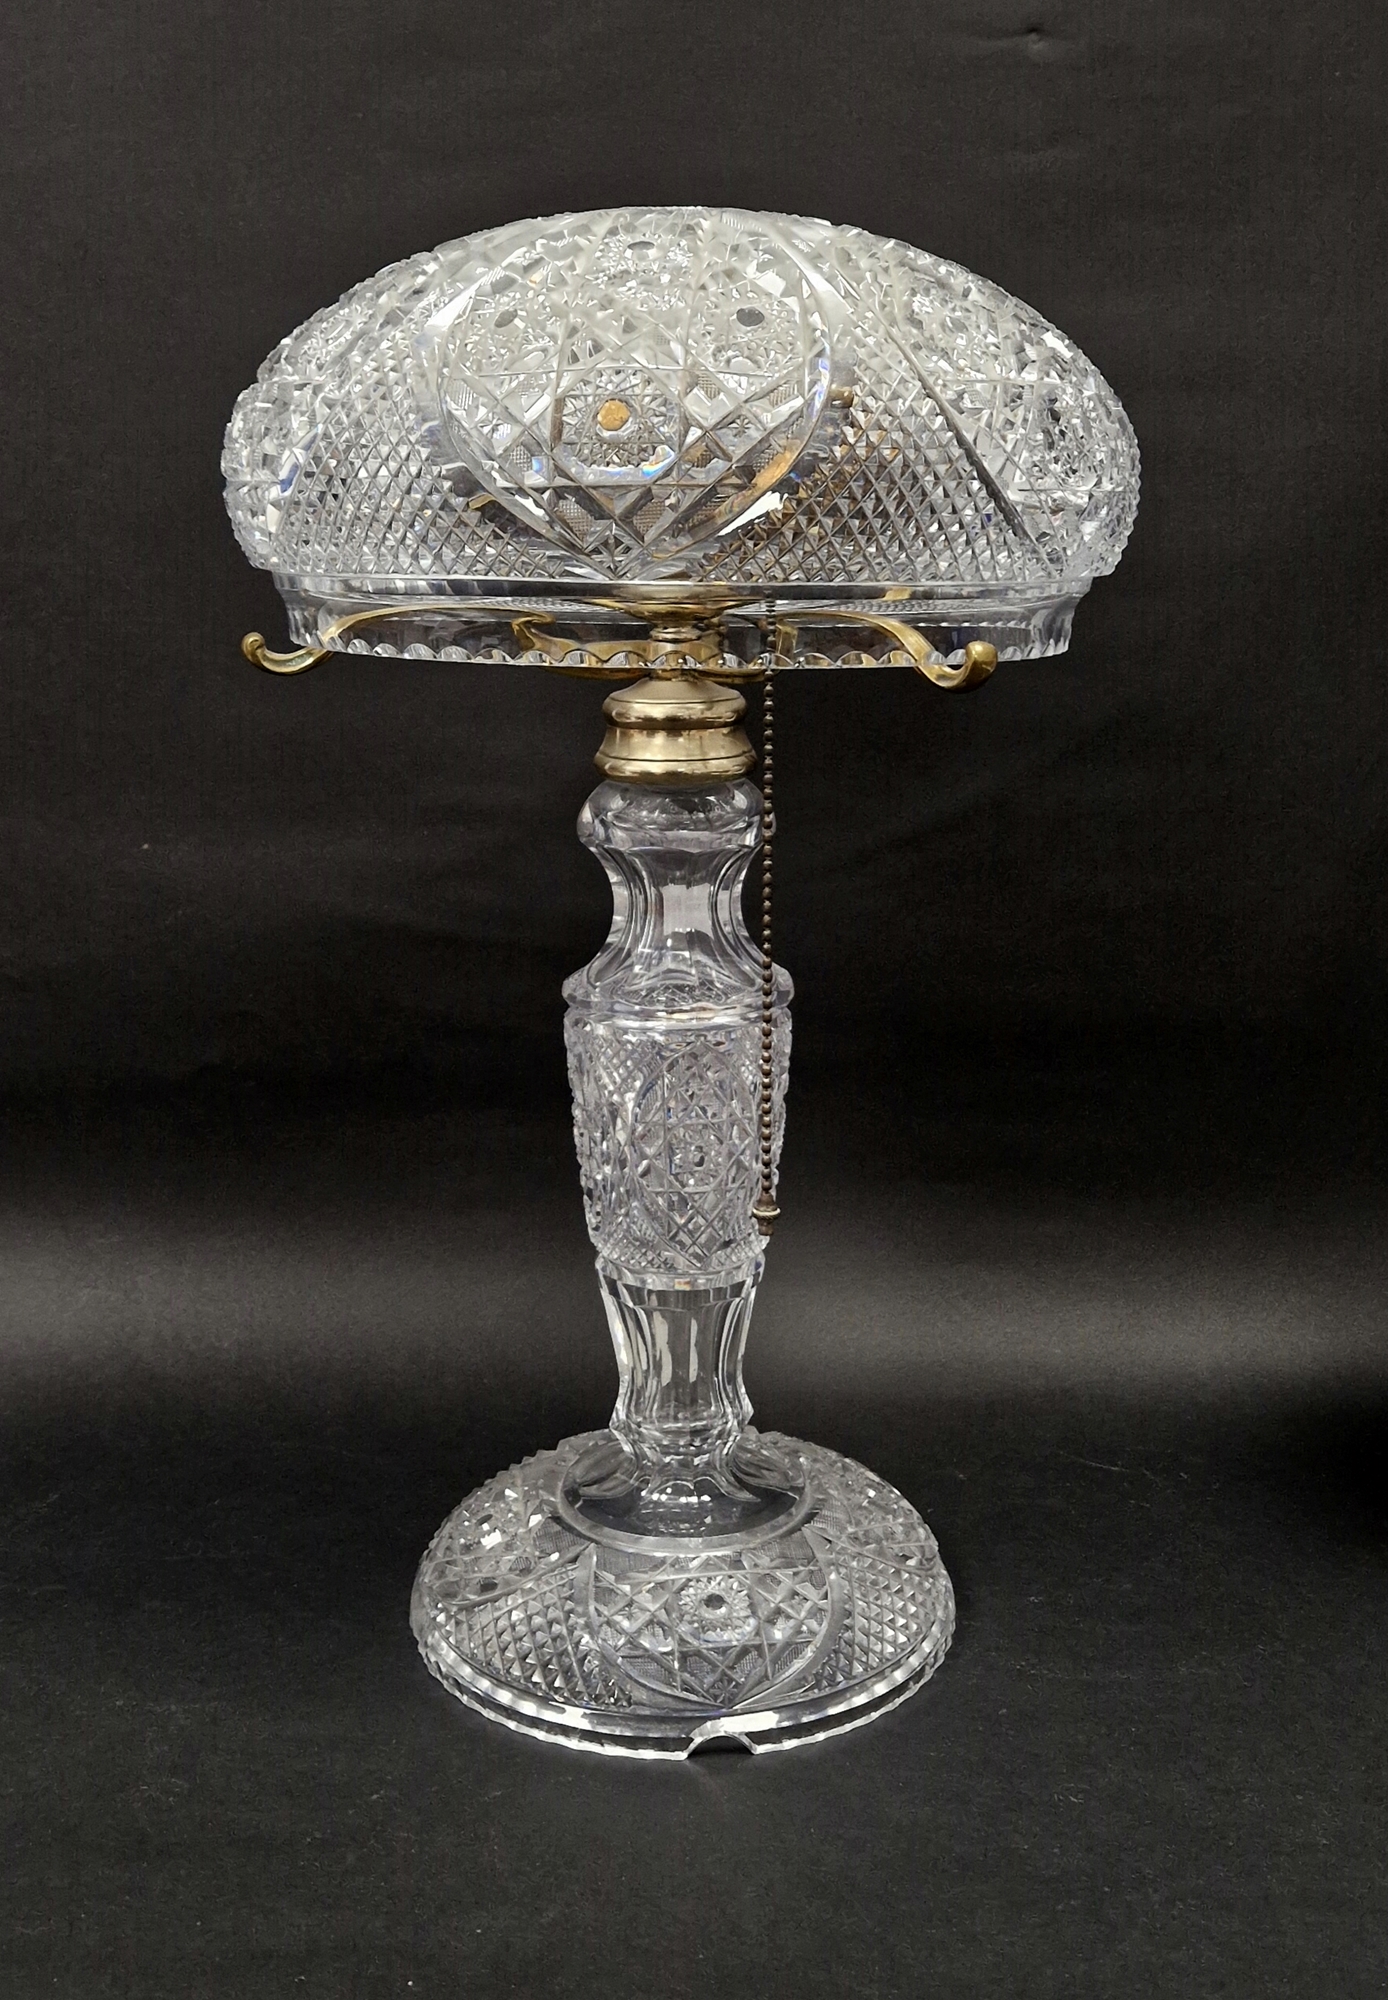 Edwardian cut glass mushroom shaped table lamp with brass fittings, 47cm high